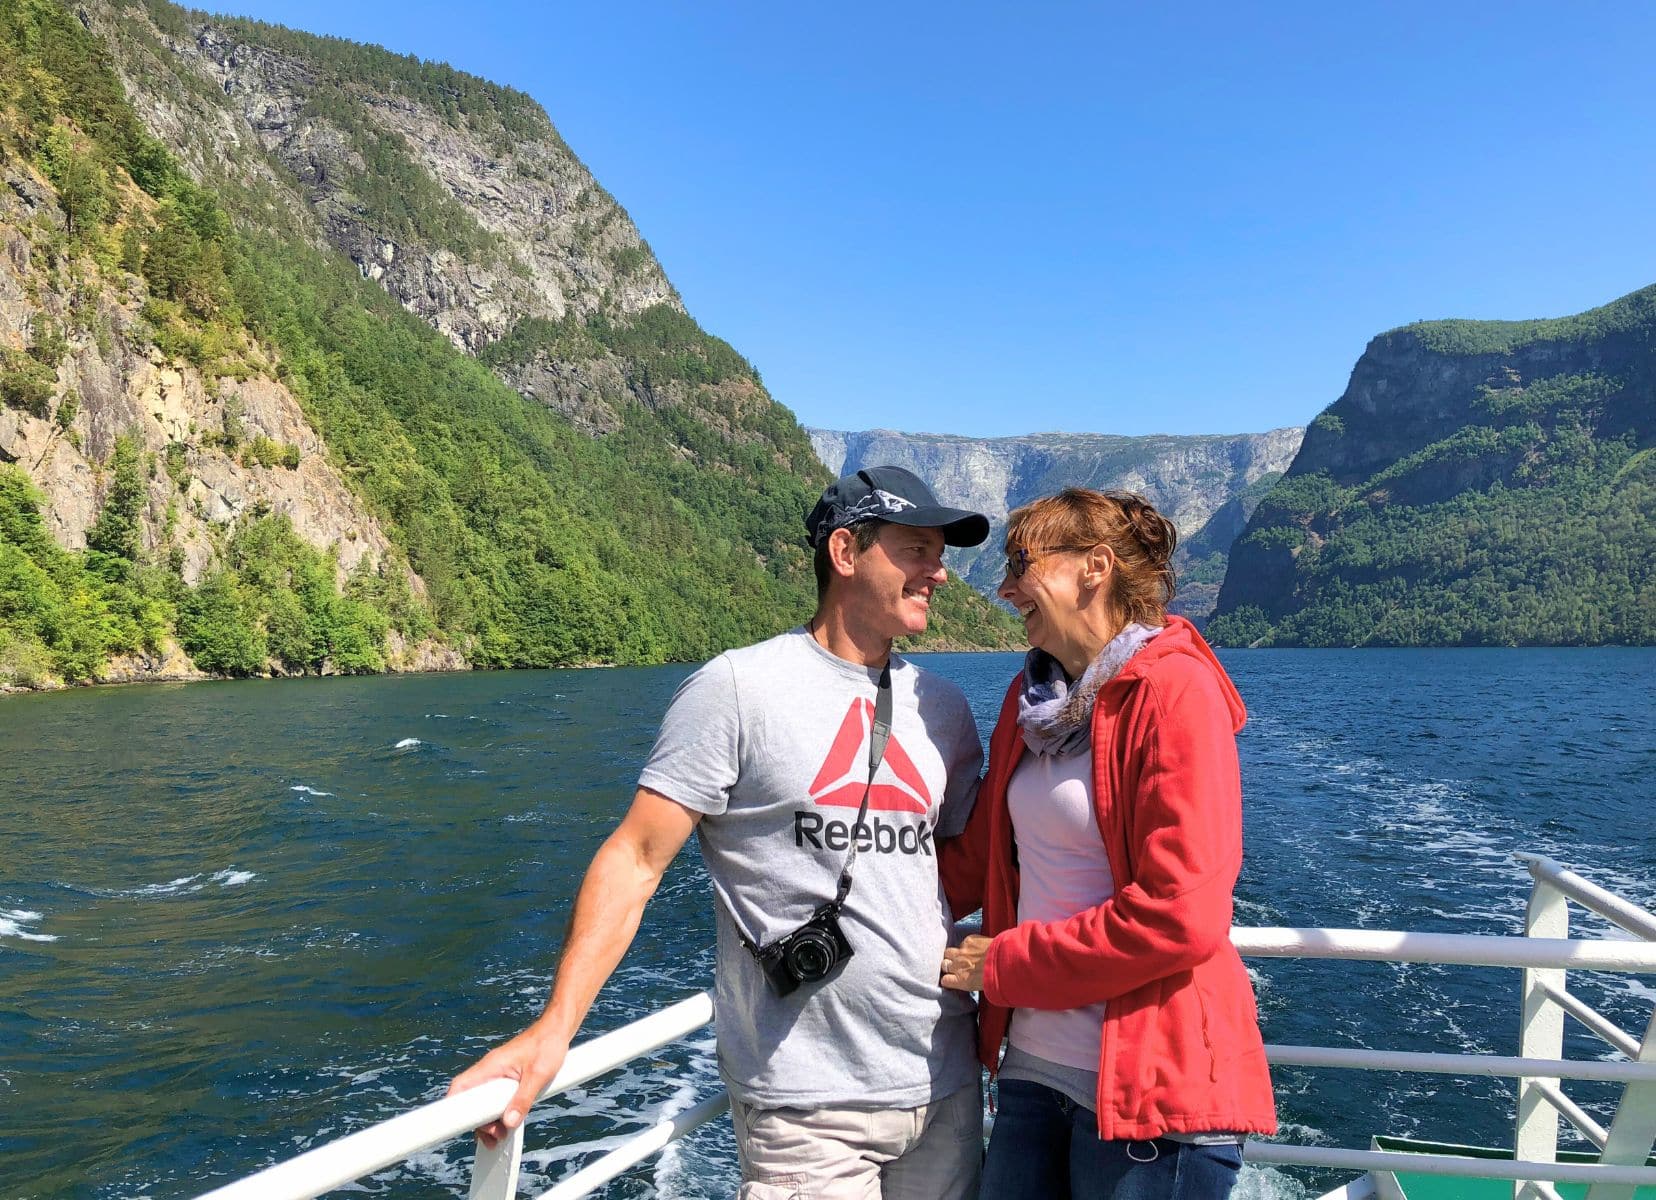 Lars and Shelley on a boat laughing with fjord and mountain the background